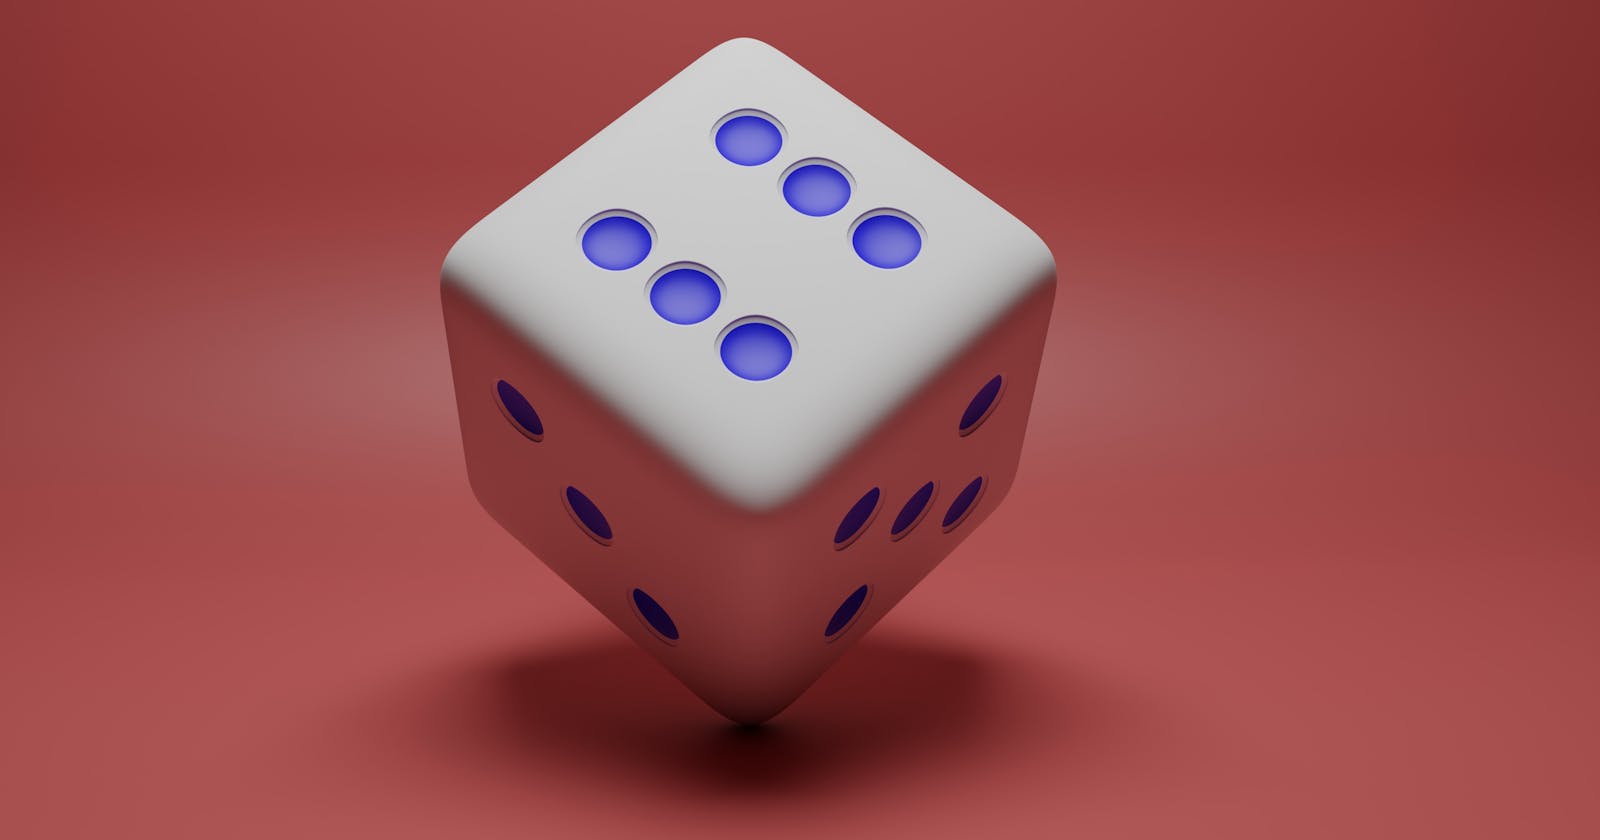 Building a Fun Dice Game with JavaScript